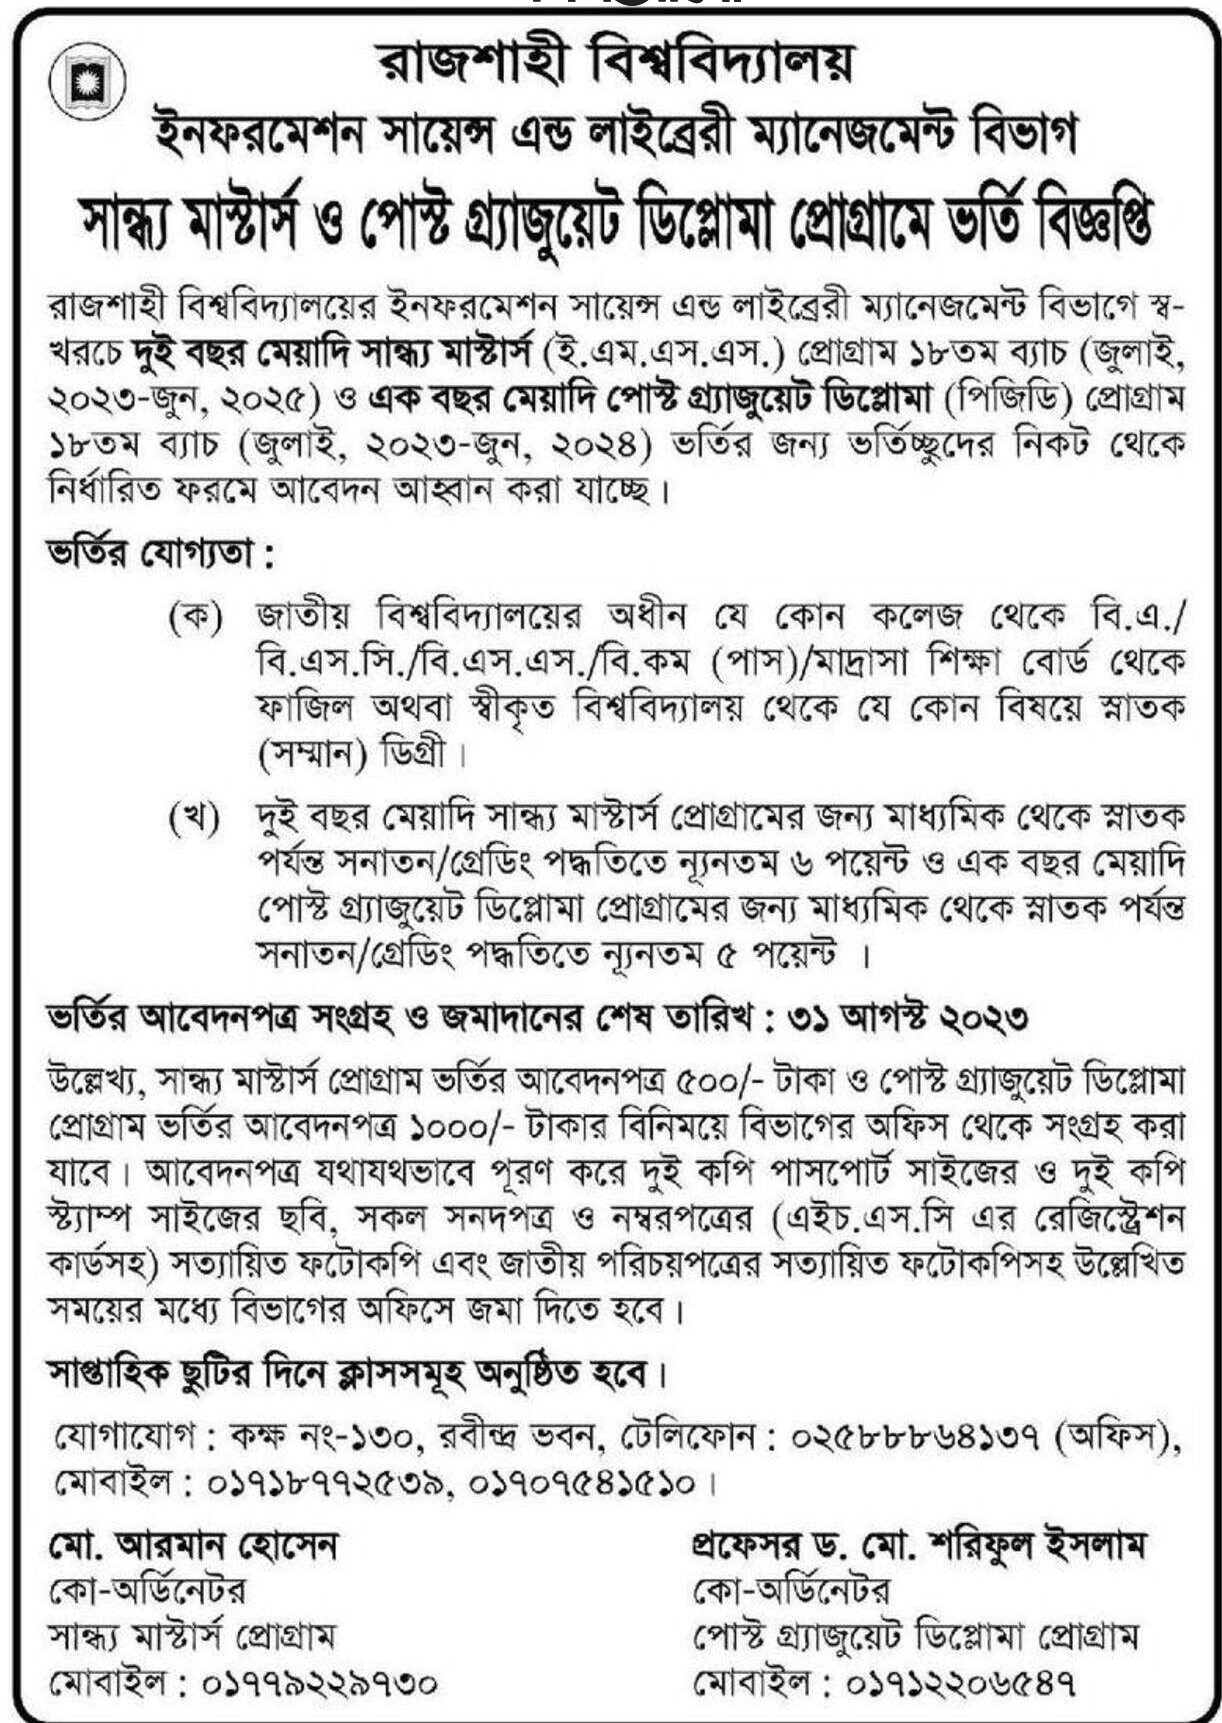 Masters in Library Science in Bangladesh